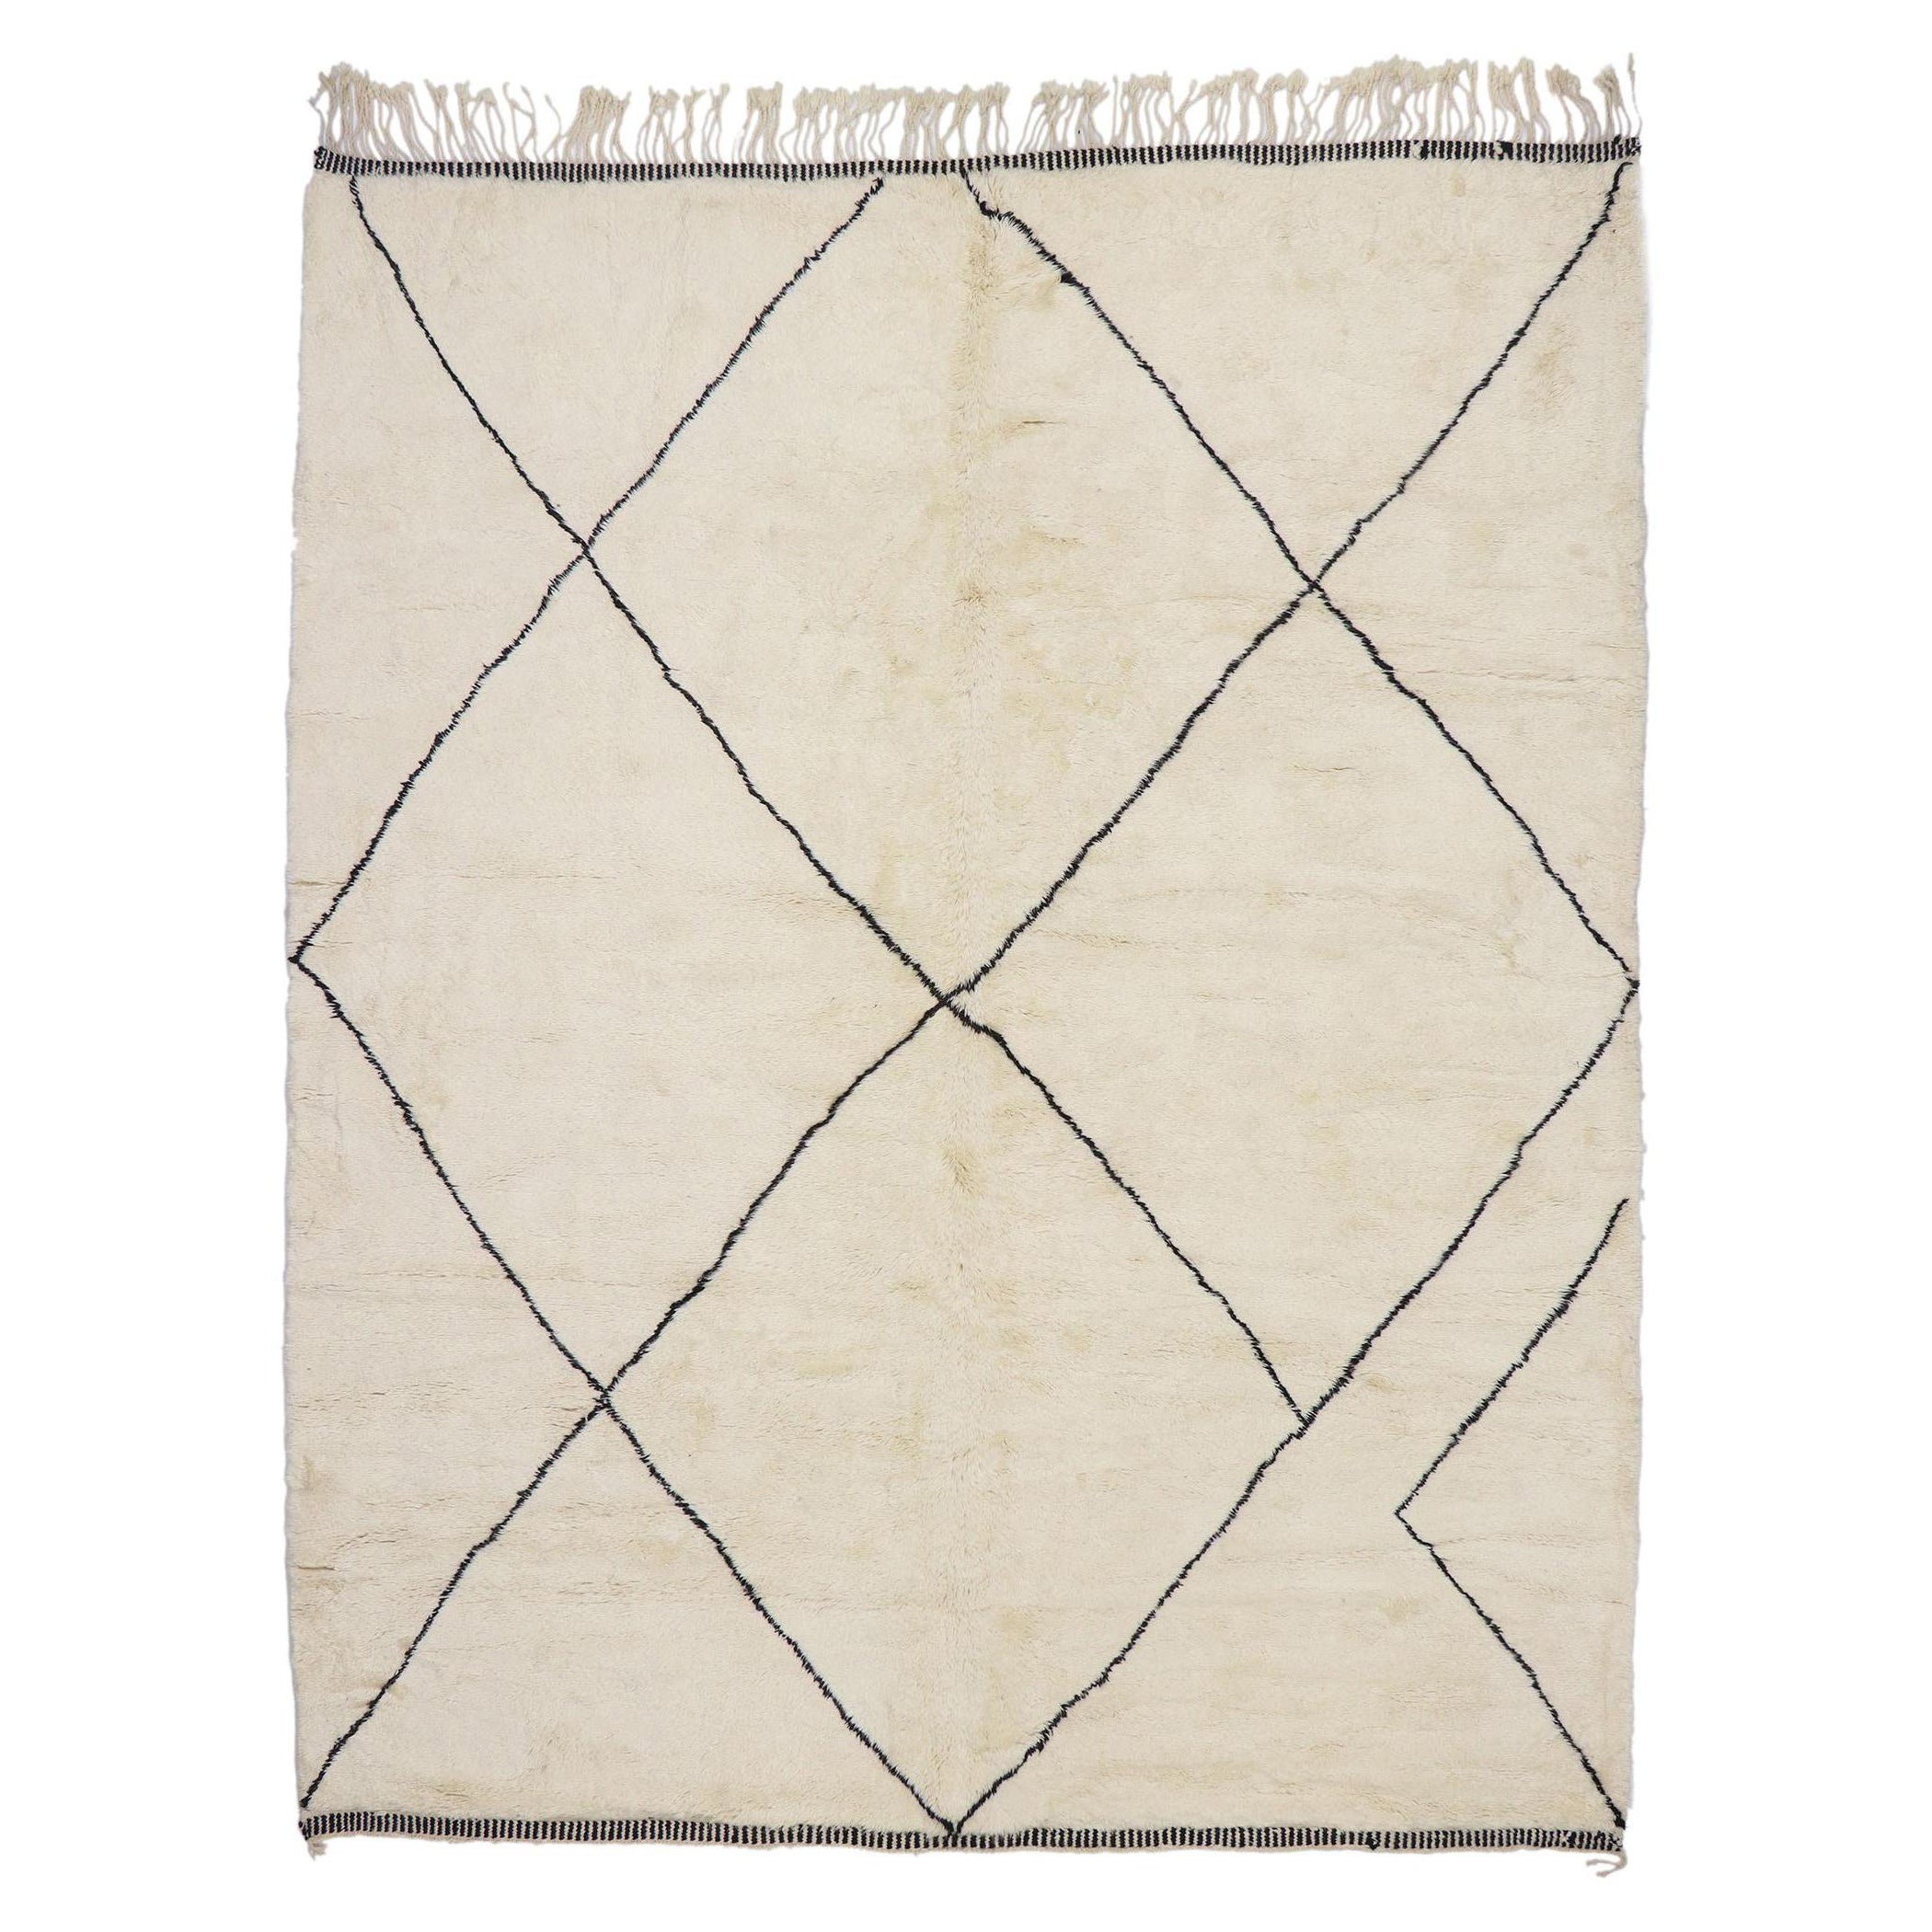 New Contemporary Berber Moroccan Rug with Minimalist Hygge Style